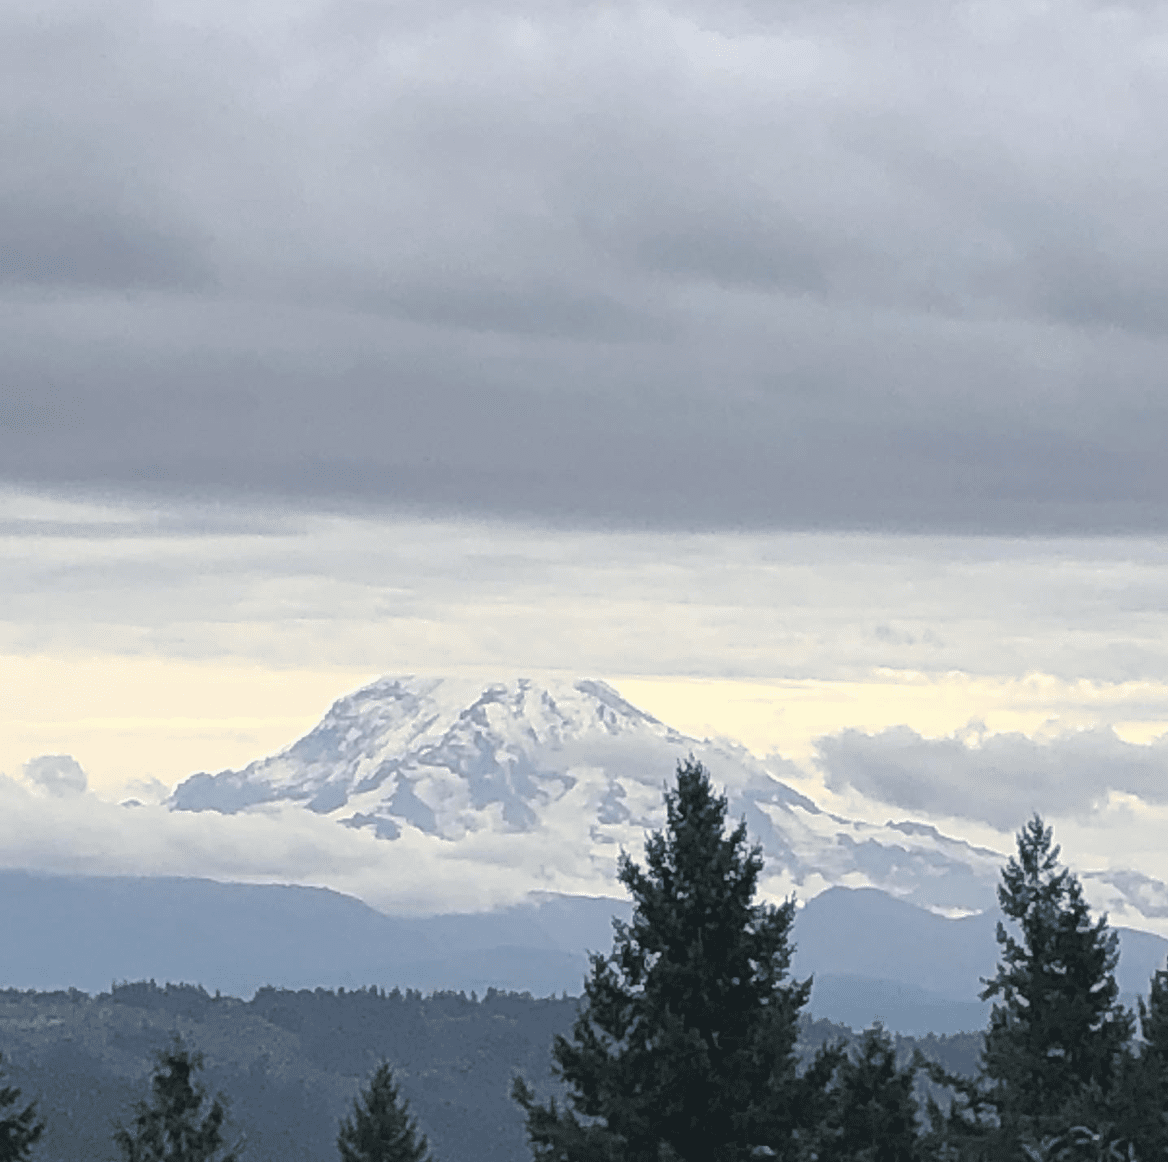 views of the mountains from Seattle